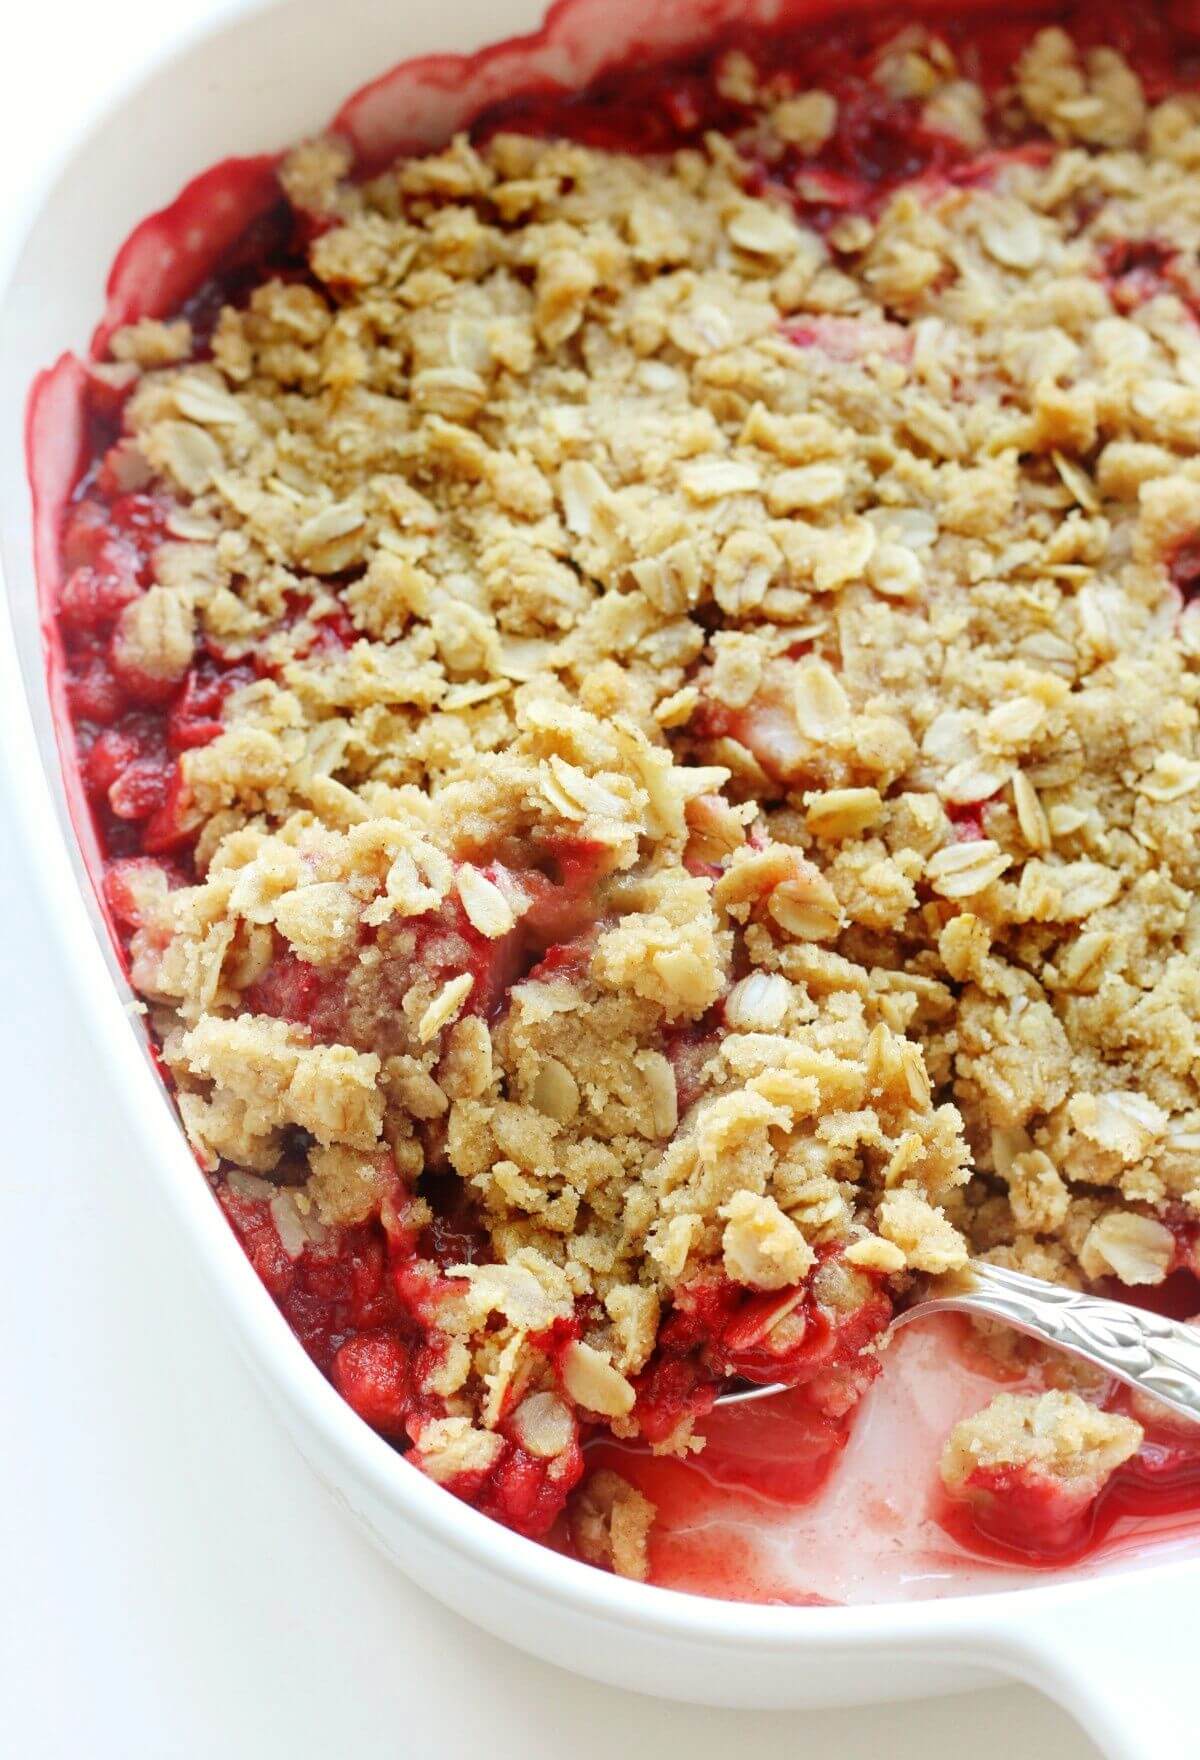 scooping gluten-free strawberry crisp out of casserole dish